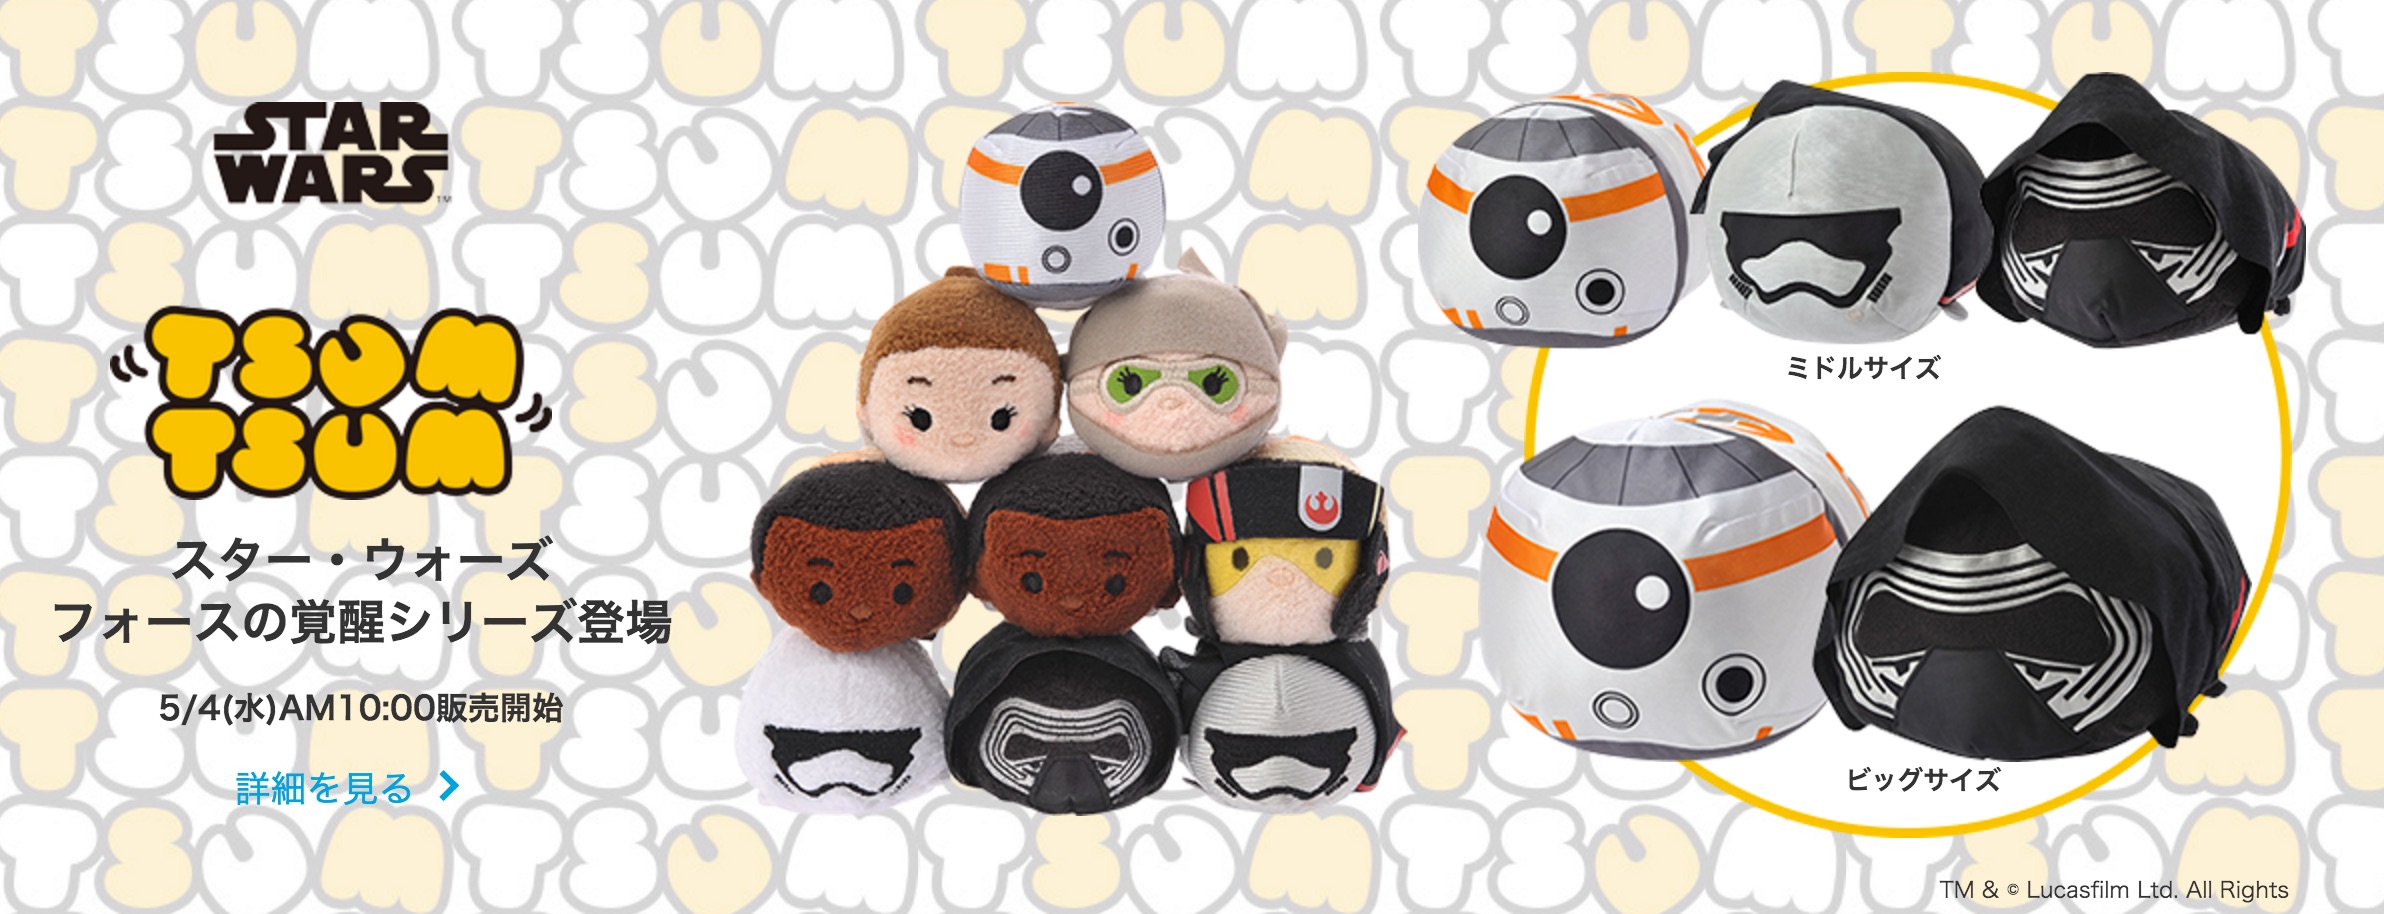 Star Wars The Force Awakens Tsum Tsum Collection JP